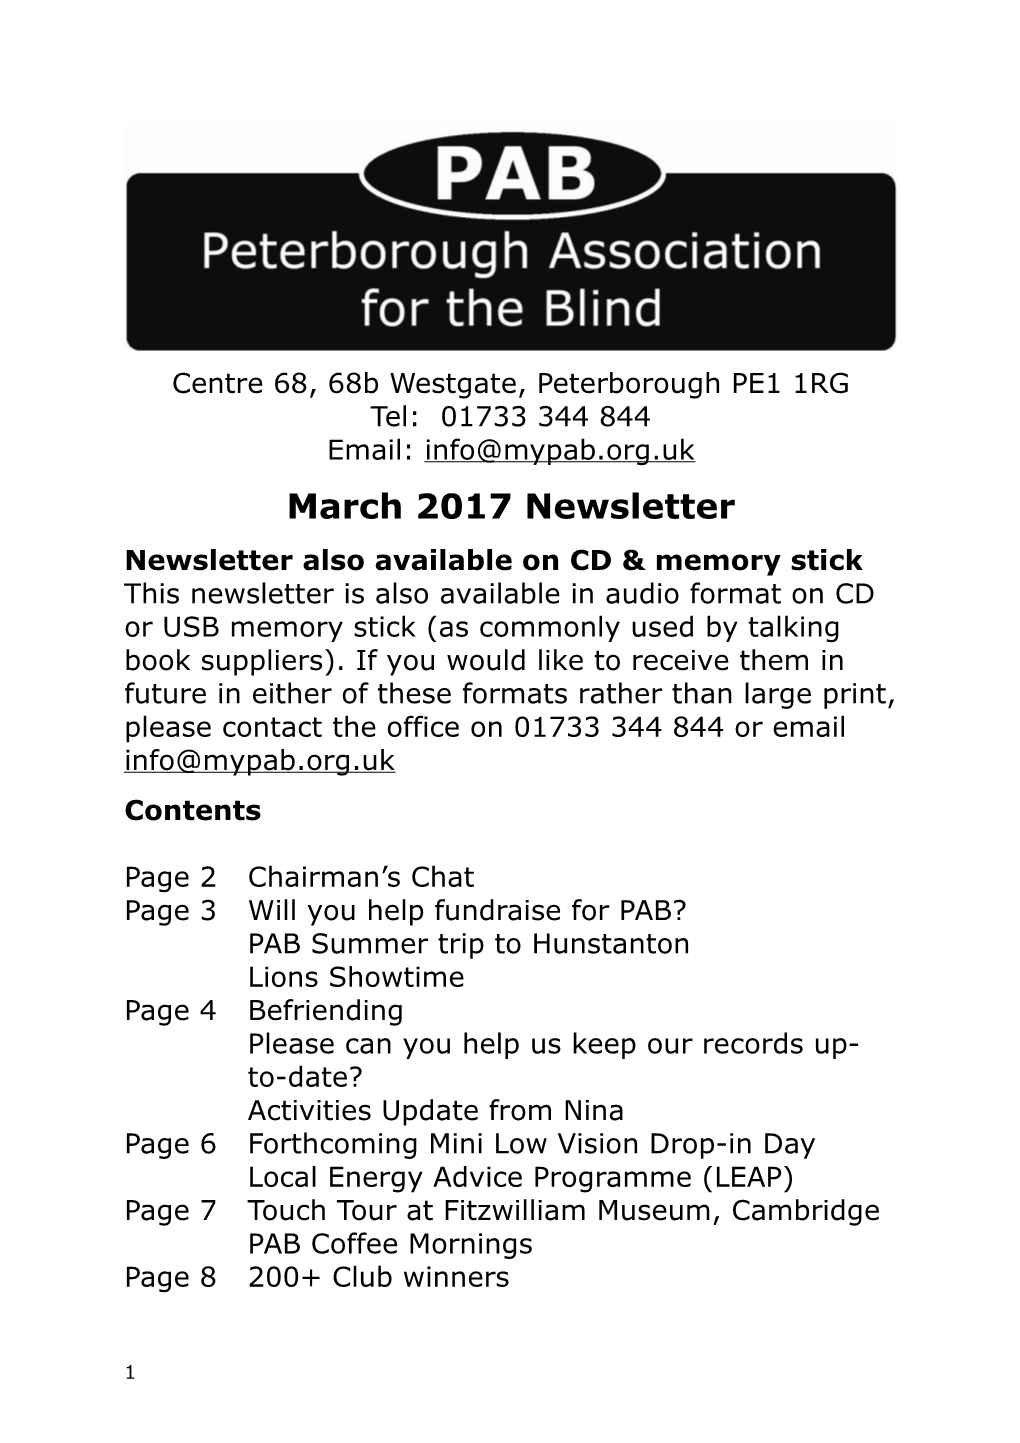 Newsletter Also Available on CD & Memory Stick